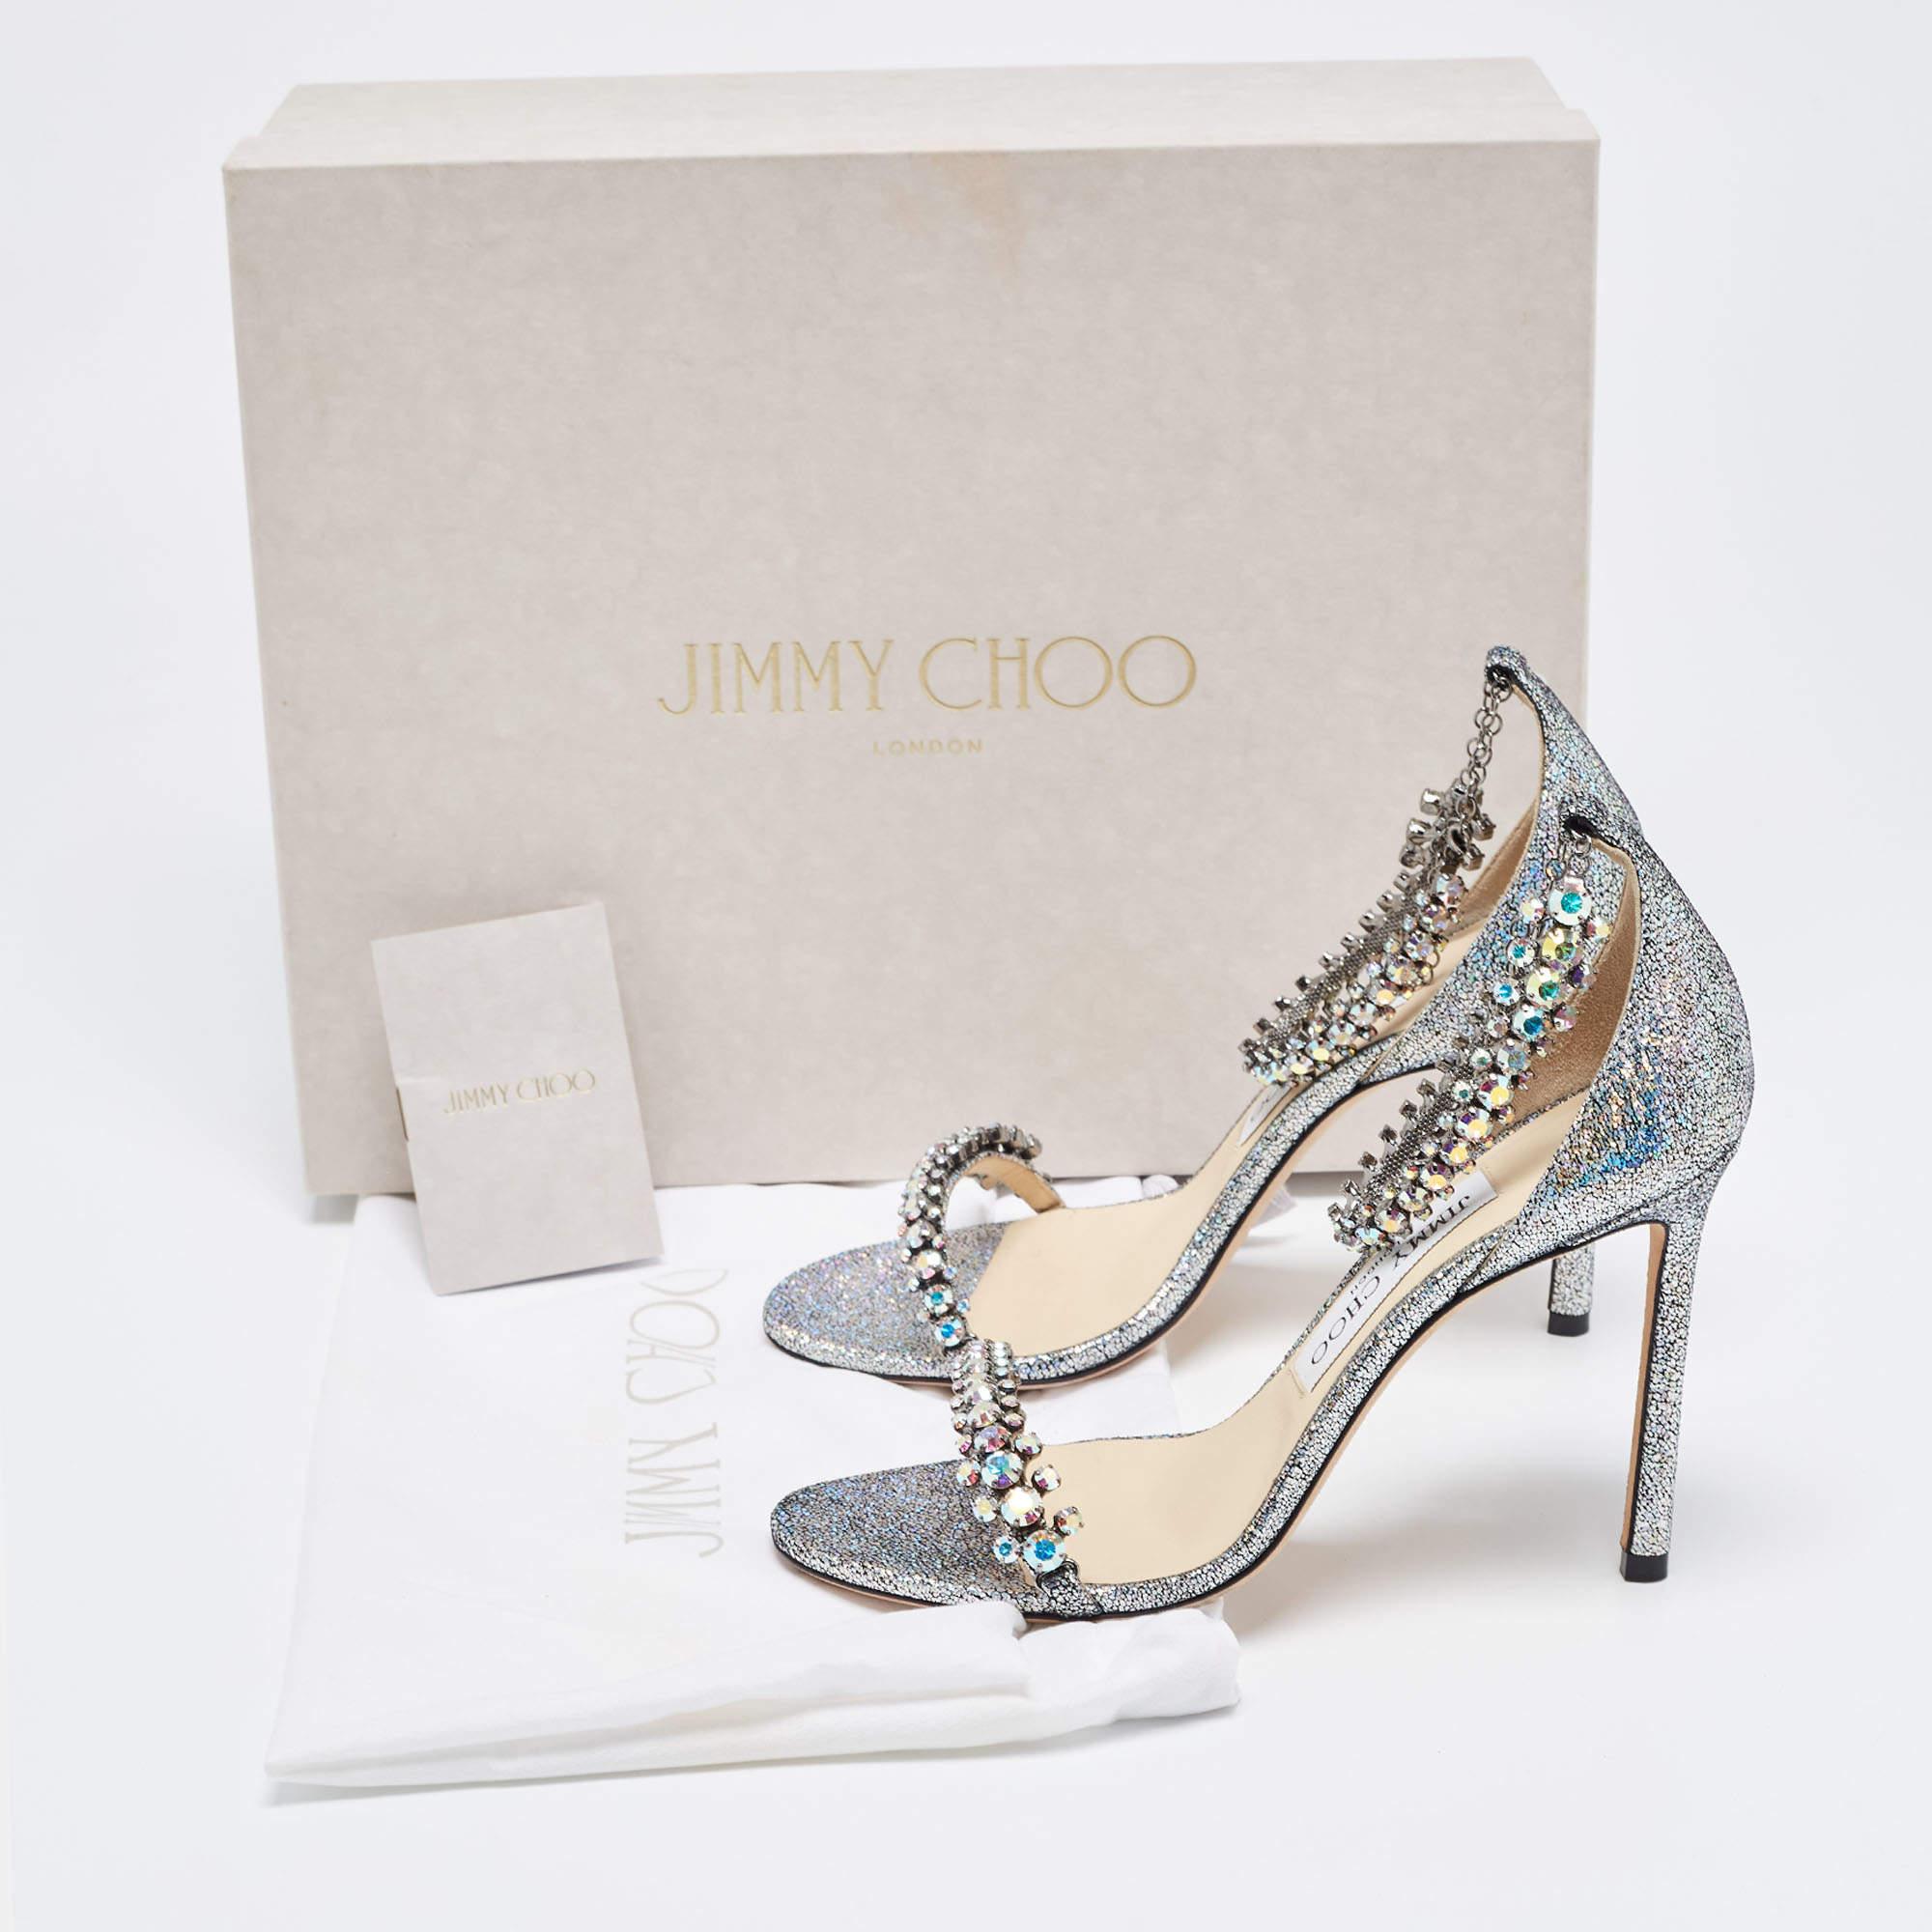 Jimmy Choo Multicolor Glitter Suede Shiloh Crystal Cuff Sandals Size 36 For Sale 5